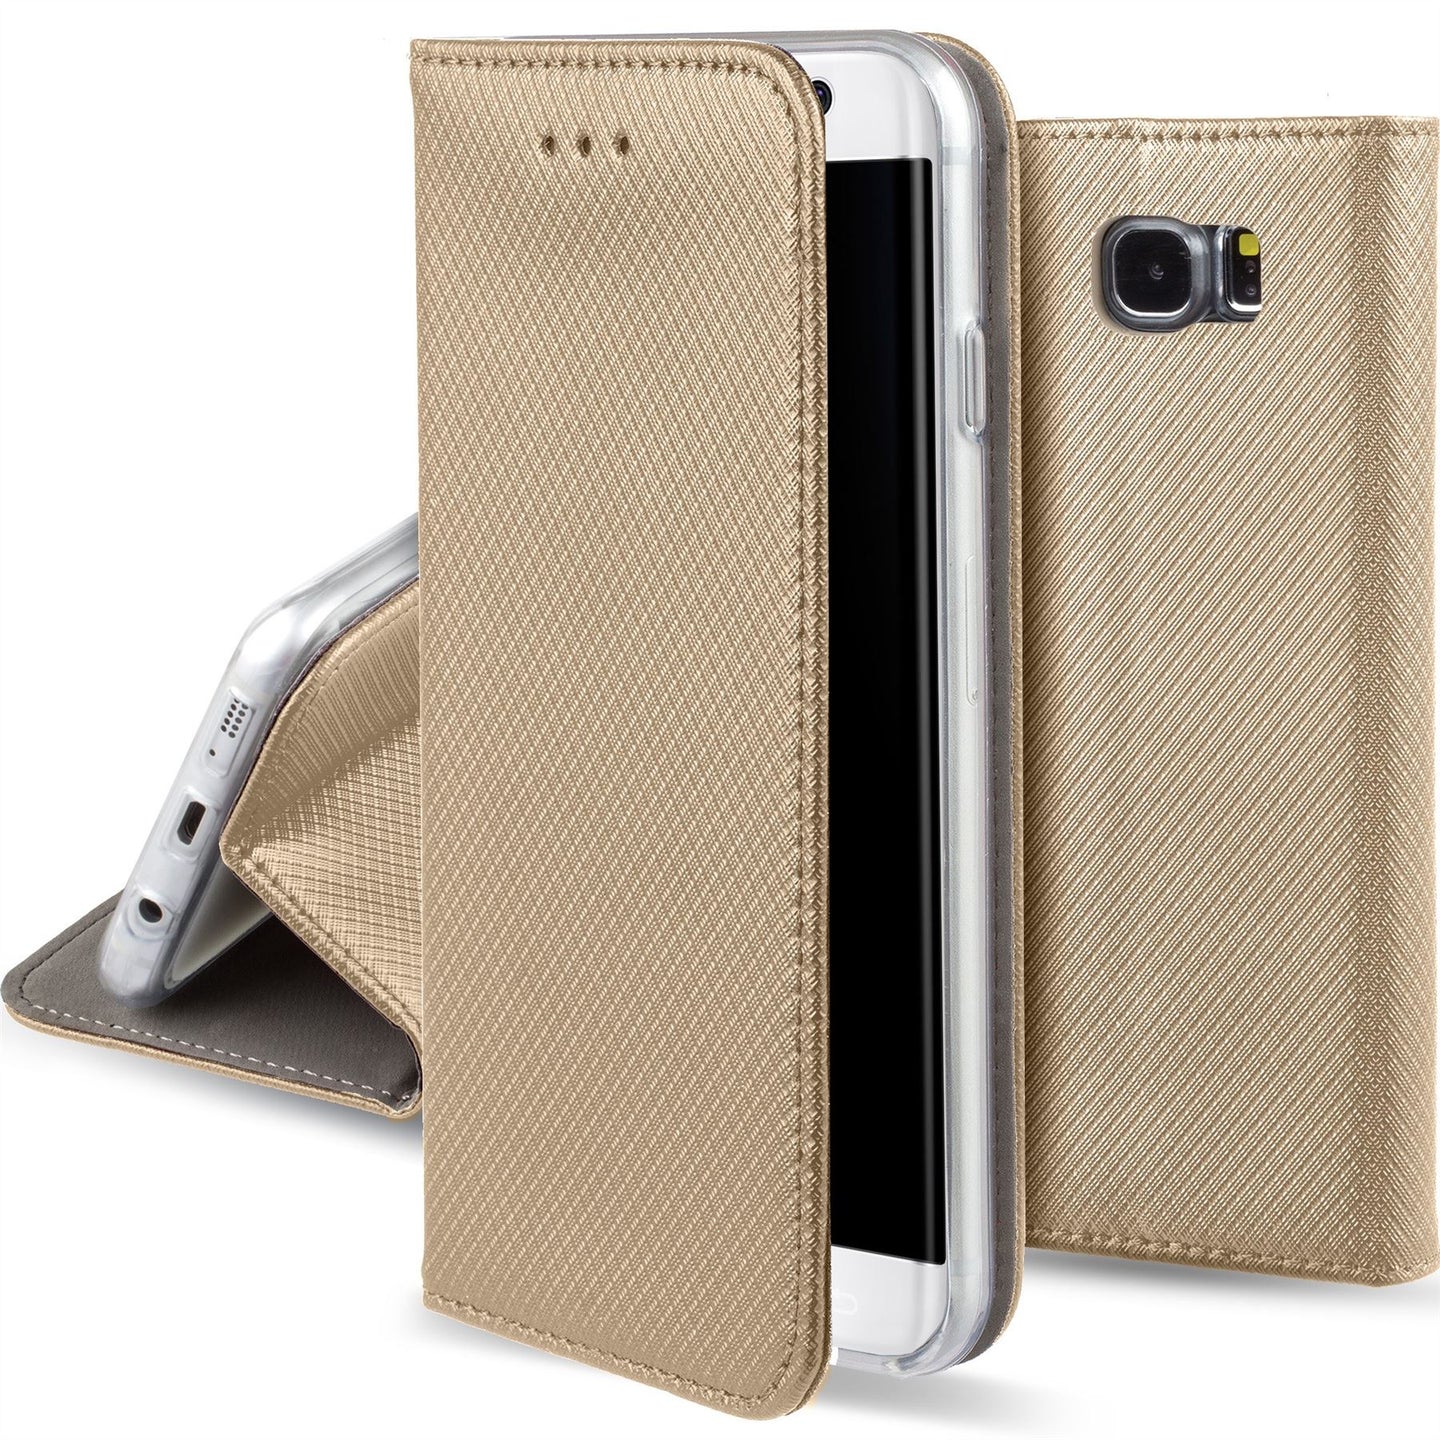 Moozy Case Flip Cover for Samsung S6, Gold - Smart Magnetic Flip Case with Card Holder and Stand